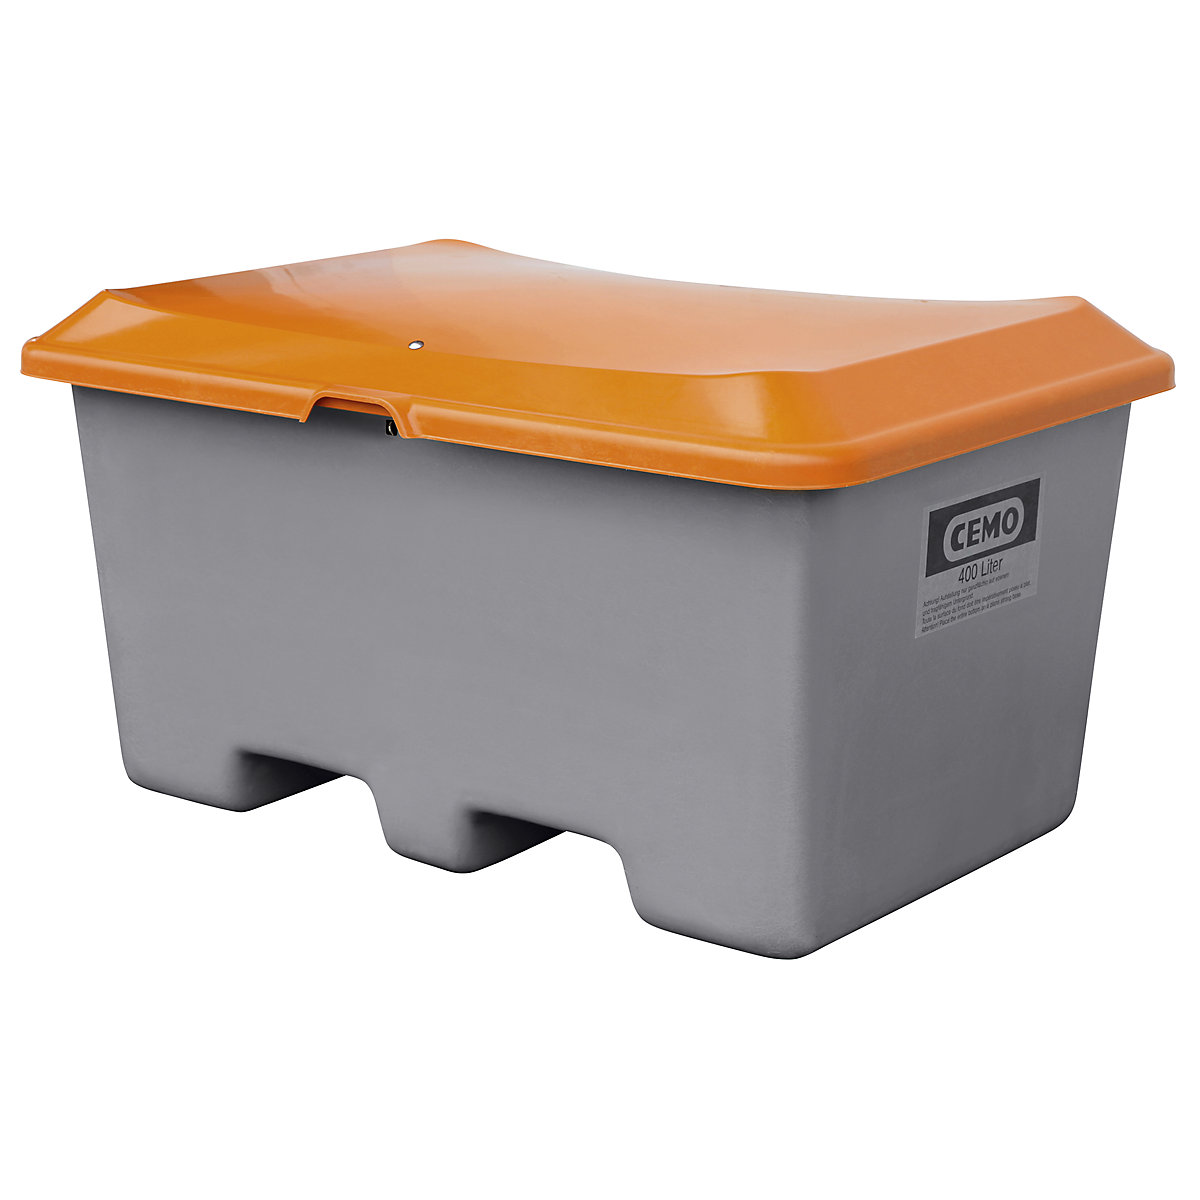 Grit container made of GRP – CEMO, capacity 400 l, without dispenser opening, clearance for forklift, grey container-4